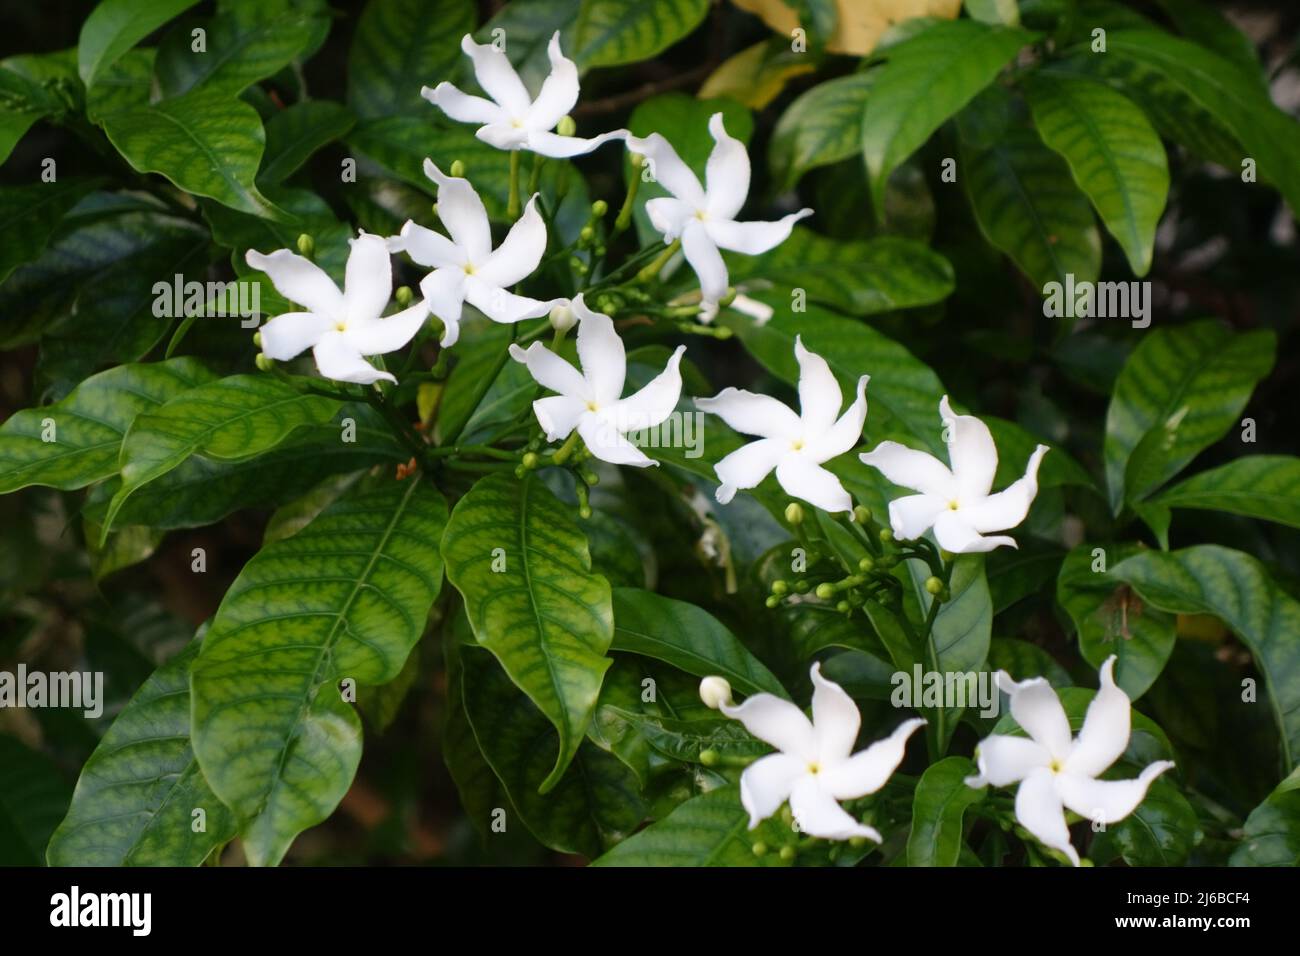 Jasmine bush with green leaves and white blossoms Stock Photo